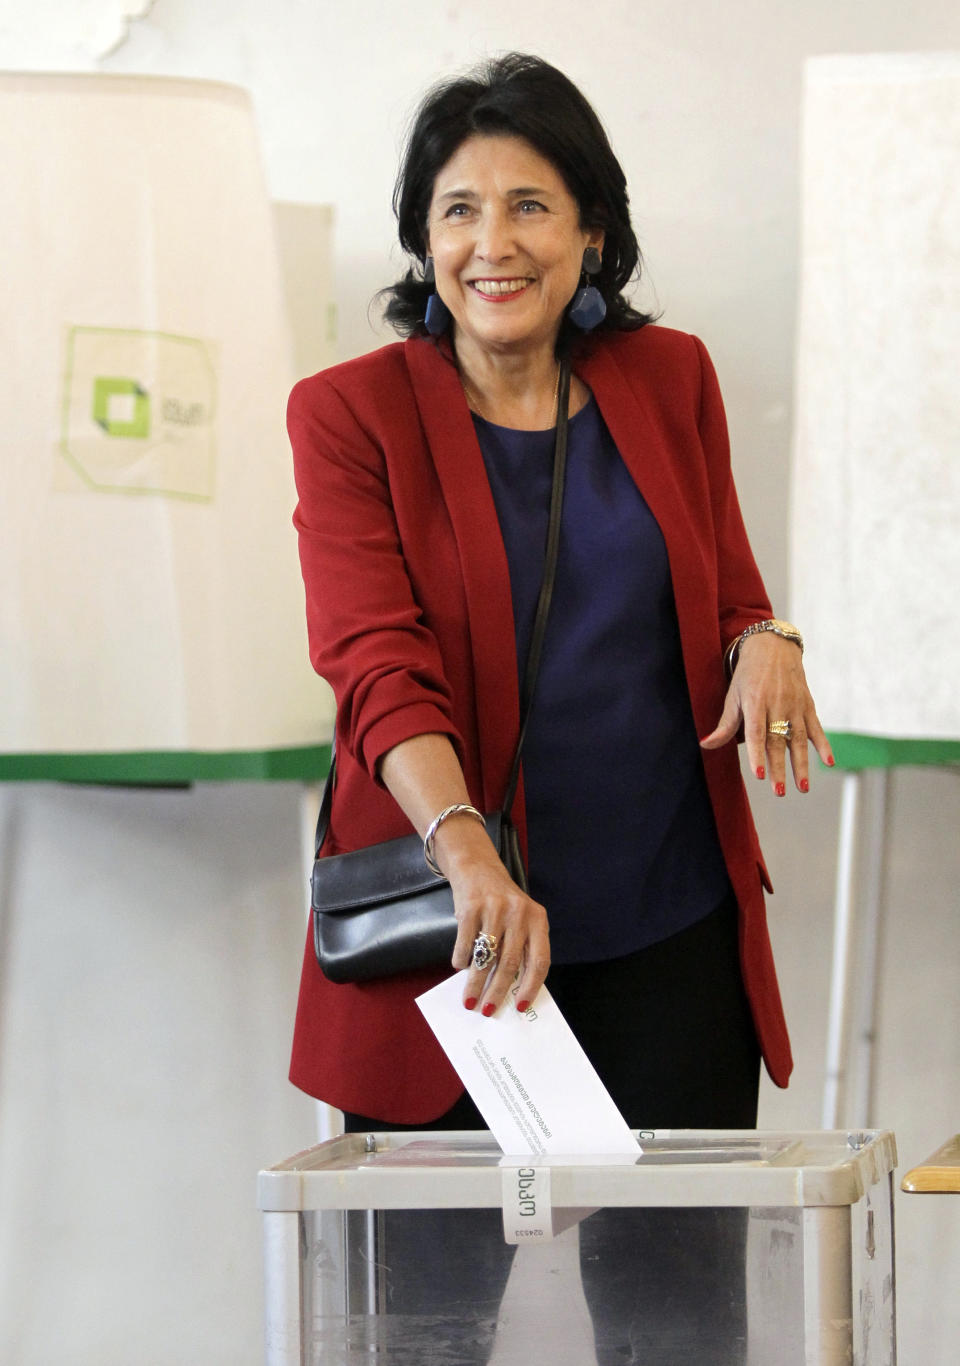 Salome Zurabishvili, former Georgian Foreign minister and presidential candidate from the European Georgia Party, casts her ballot at the polling station in Tbilisi, Georgia, Sunday, Oct. 28, 2018. Voters in Georgia are choosing a new president for the former Soviet republic, the last time the president will be elected by direct ballot. (AP Photo/Shakh Aivazov)